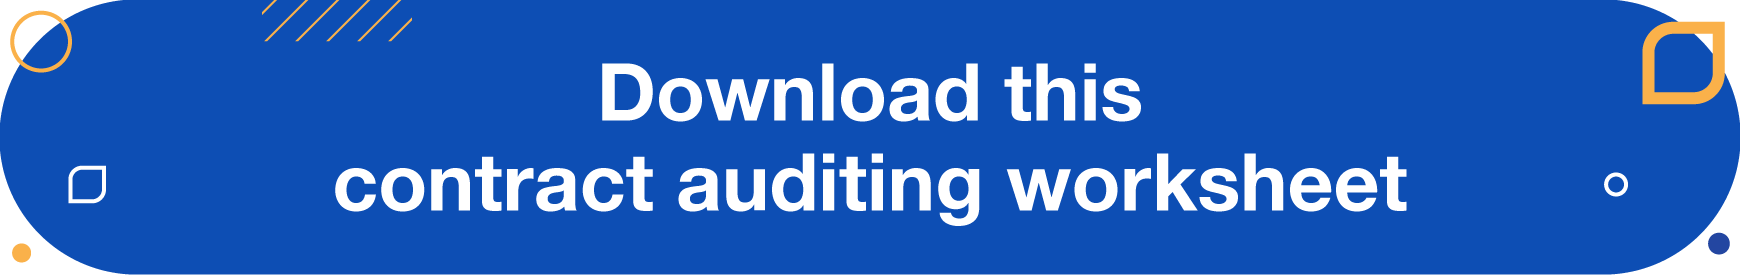 contract-auditing-worksheet-download